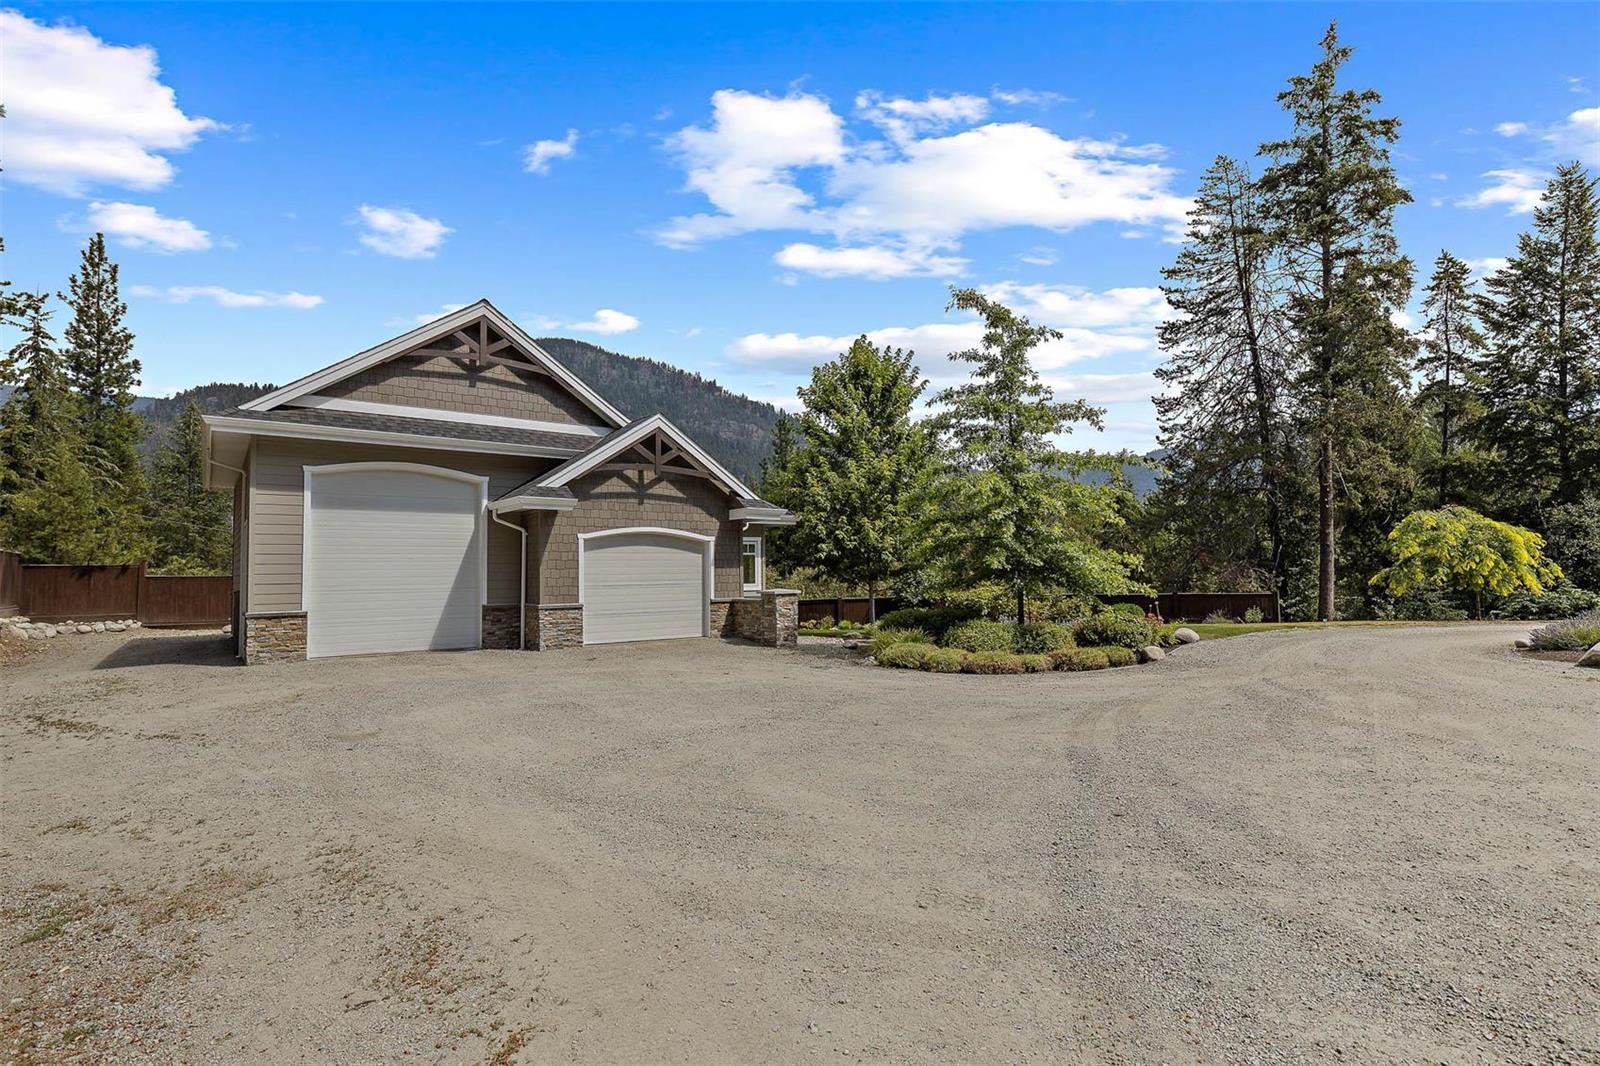      5051 Paradise Valley Drive  , Peachland, Central Okanagan,  ;  Listing Number: MLS 10260836